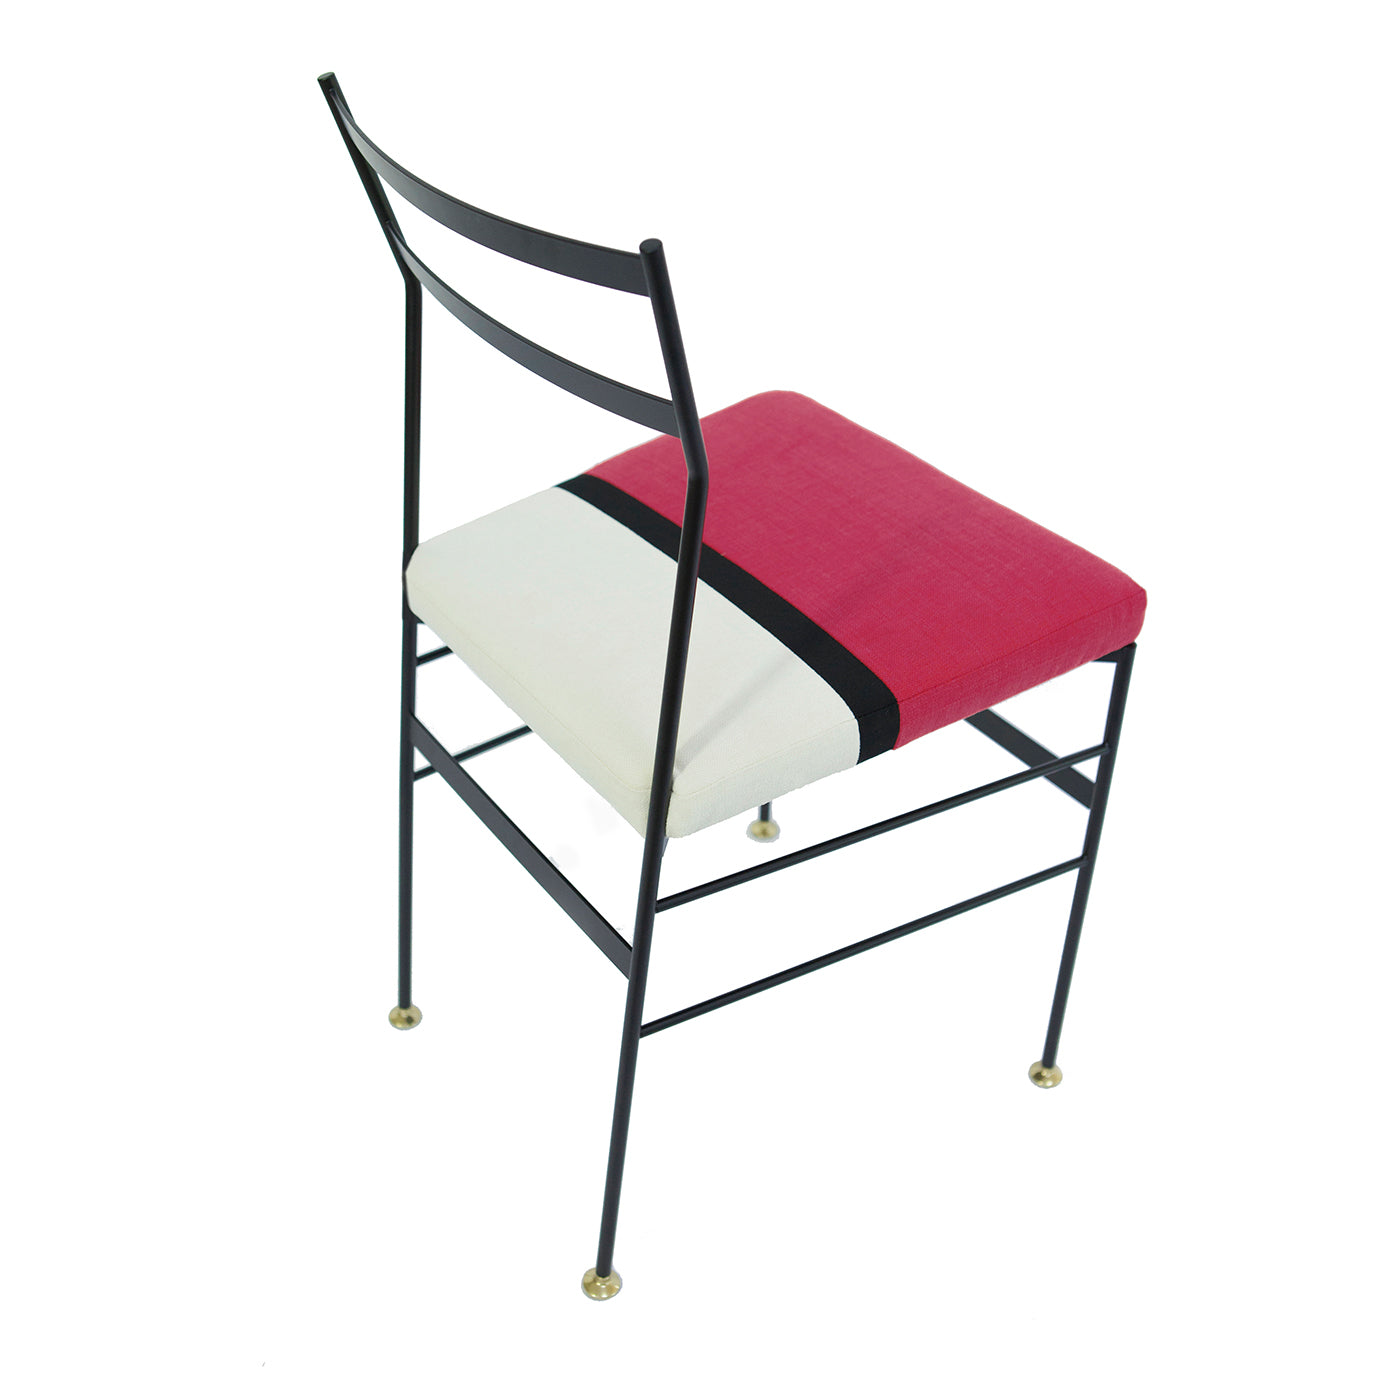 Set of 2 Pontina Bruxel Red and White Chair - Alternative view 2